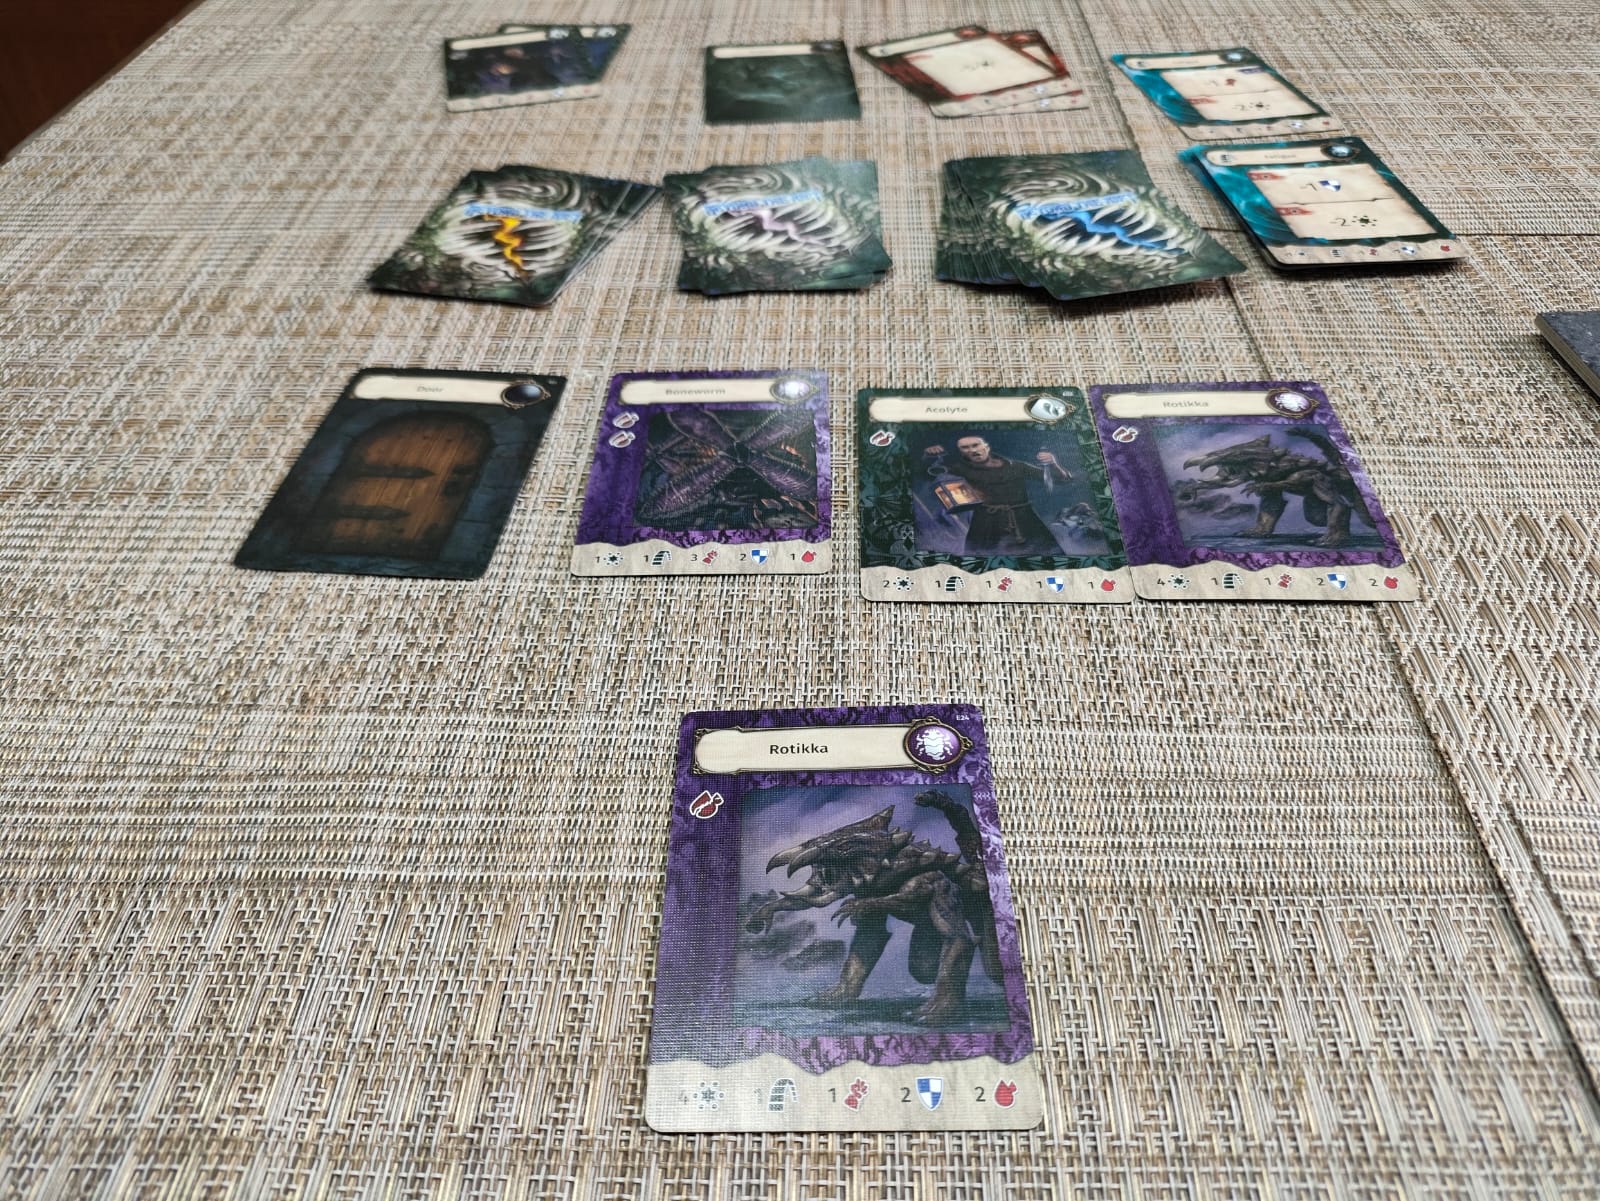 Reseña Beyond the Rift: A Perdition's Mouth Card Game 4